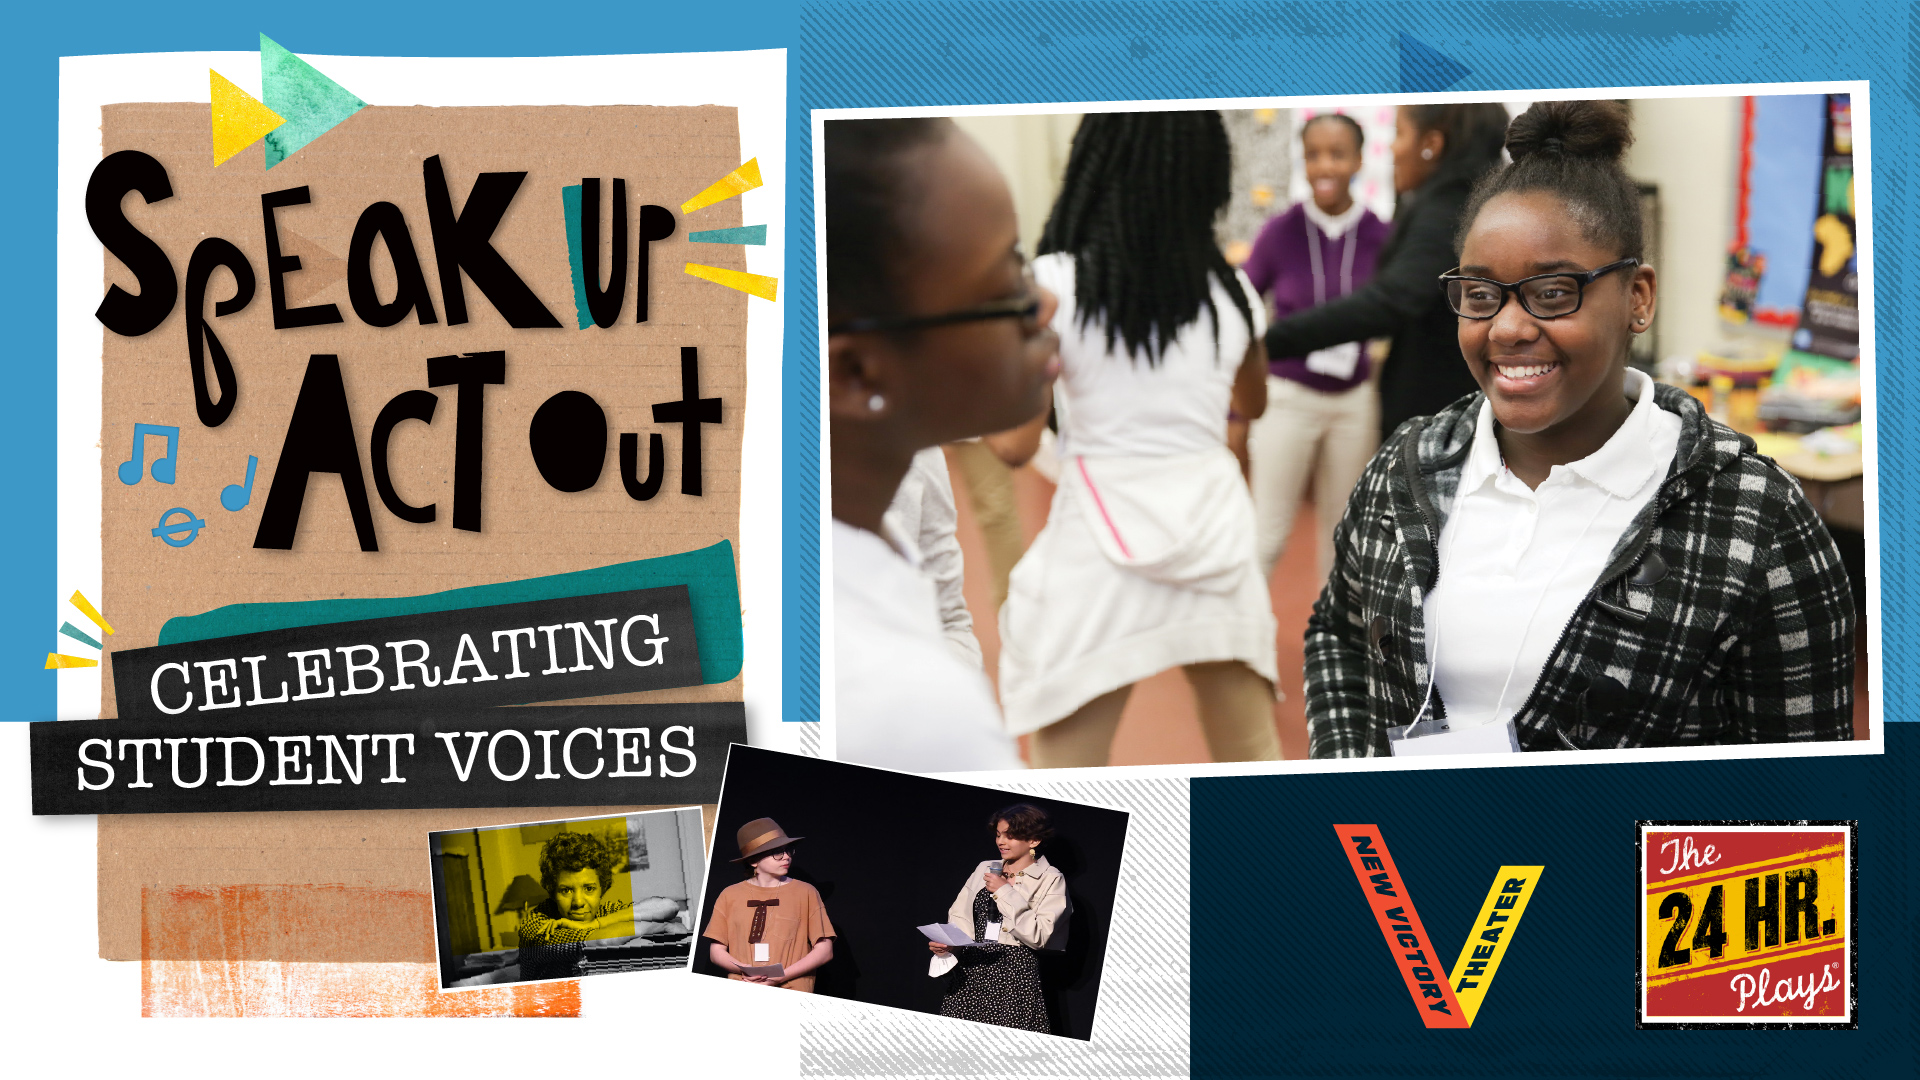 Speak-Up-Act-Out-Celebrating-Student-Voices (1)